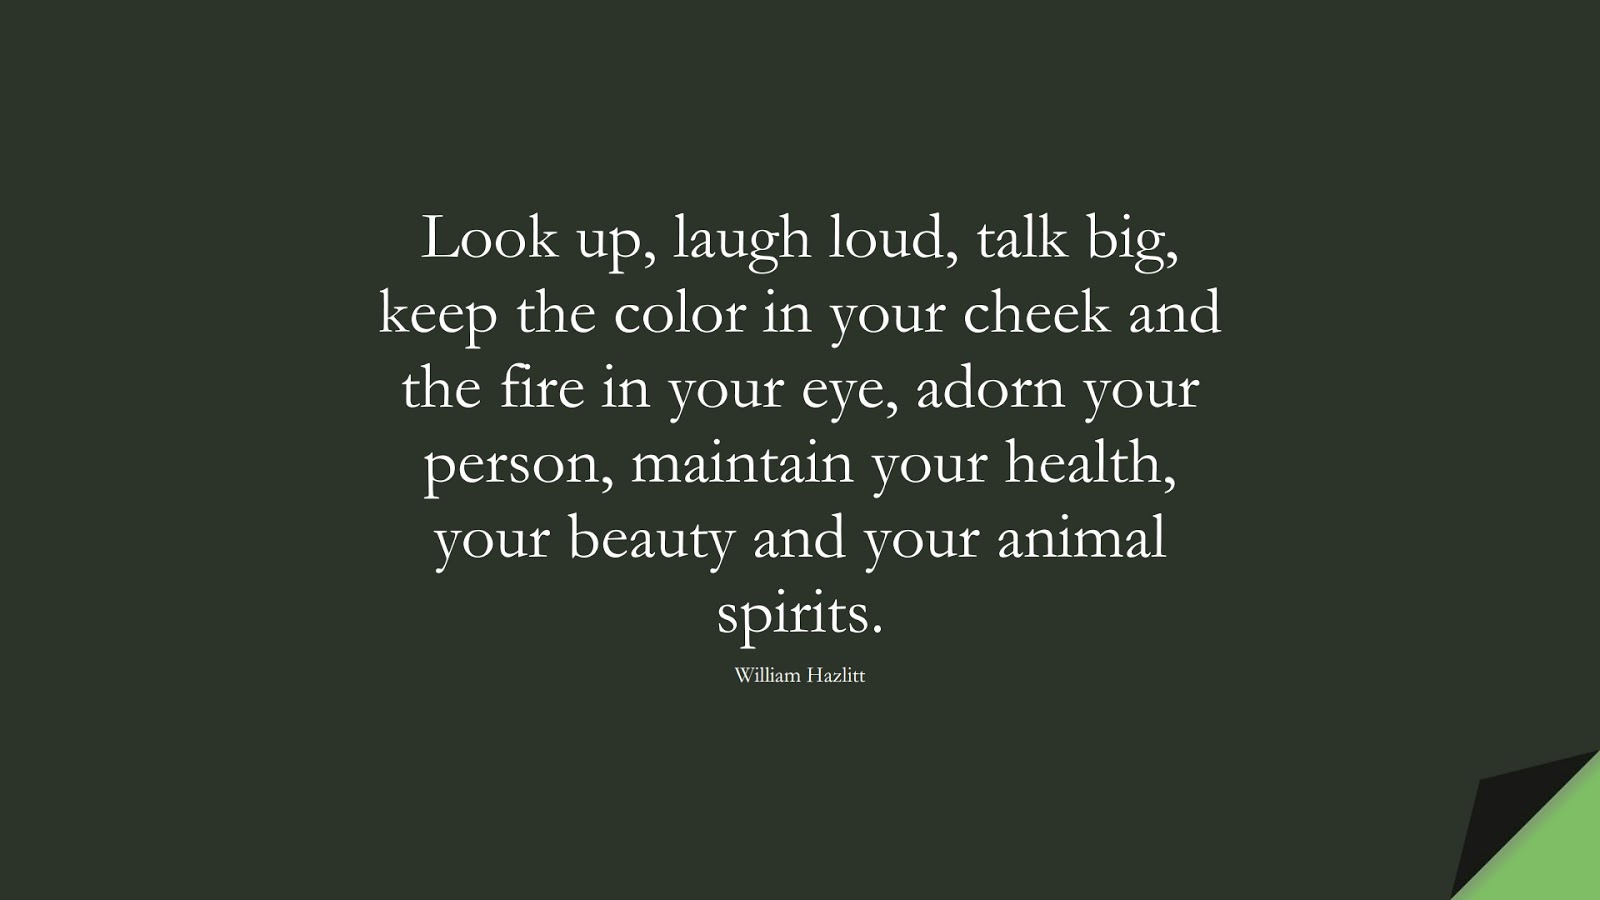 Look up, laugh loud, talk big, keep the color in your cheek and the fire in your eye, adorn your person, maintain your health, your beauty and your animal spirits. (William Hazlitt);  #HealthQuotes